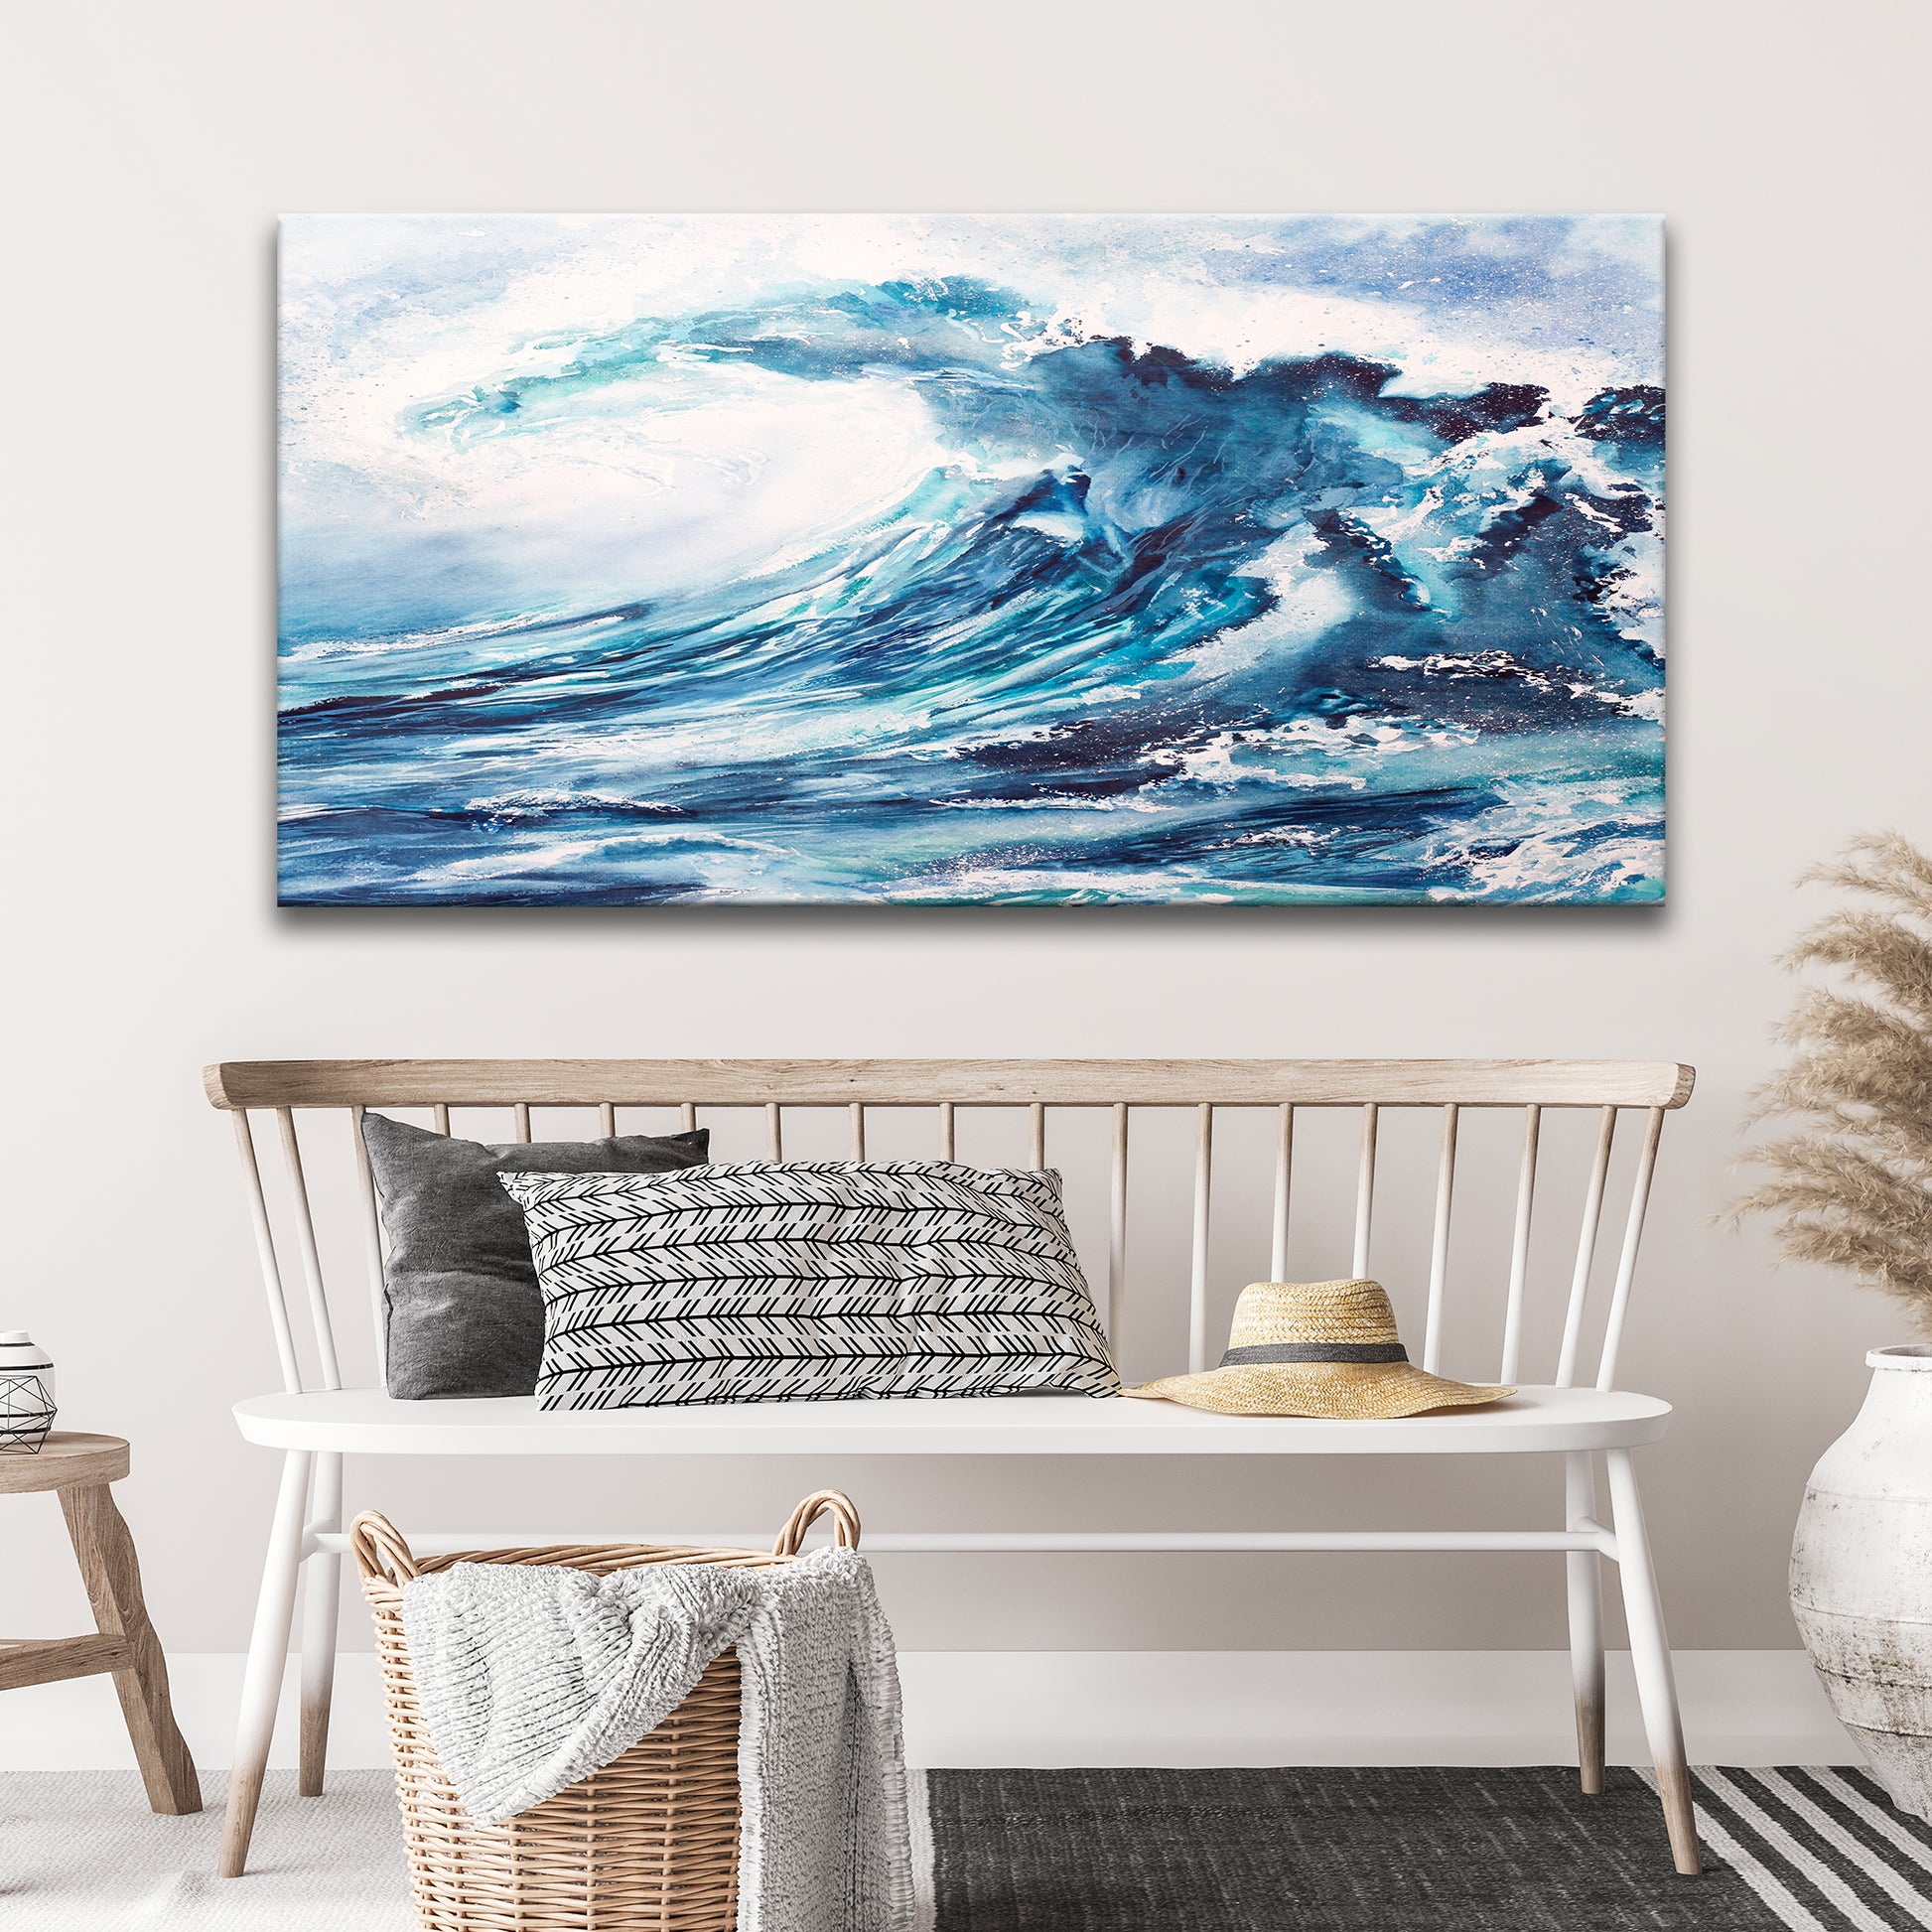 Textured Ocean Wave Painting Canvas Wall Art  - Image by Tailored Canvases